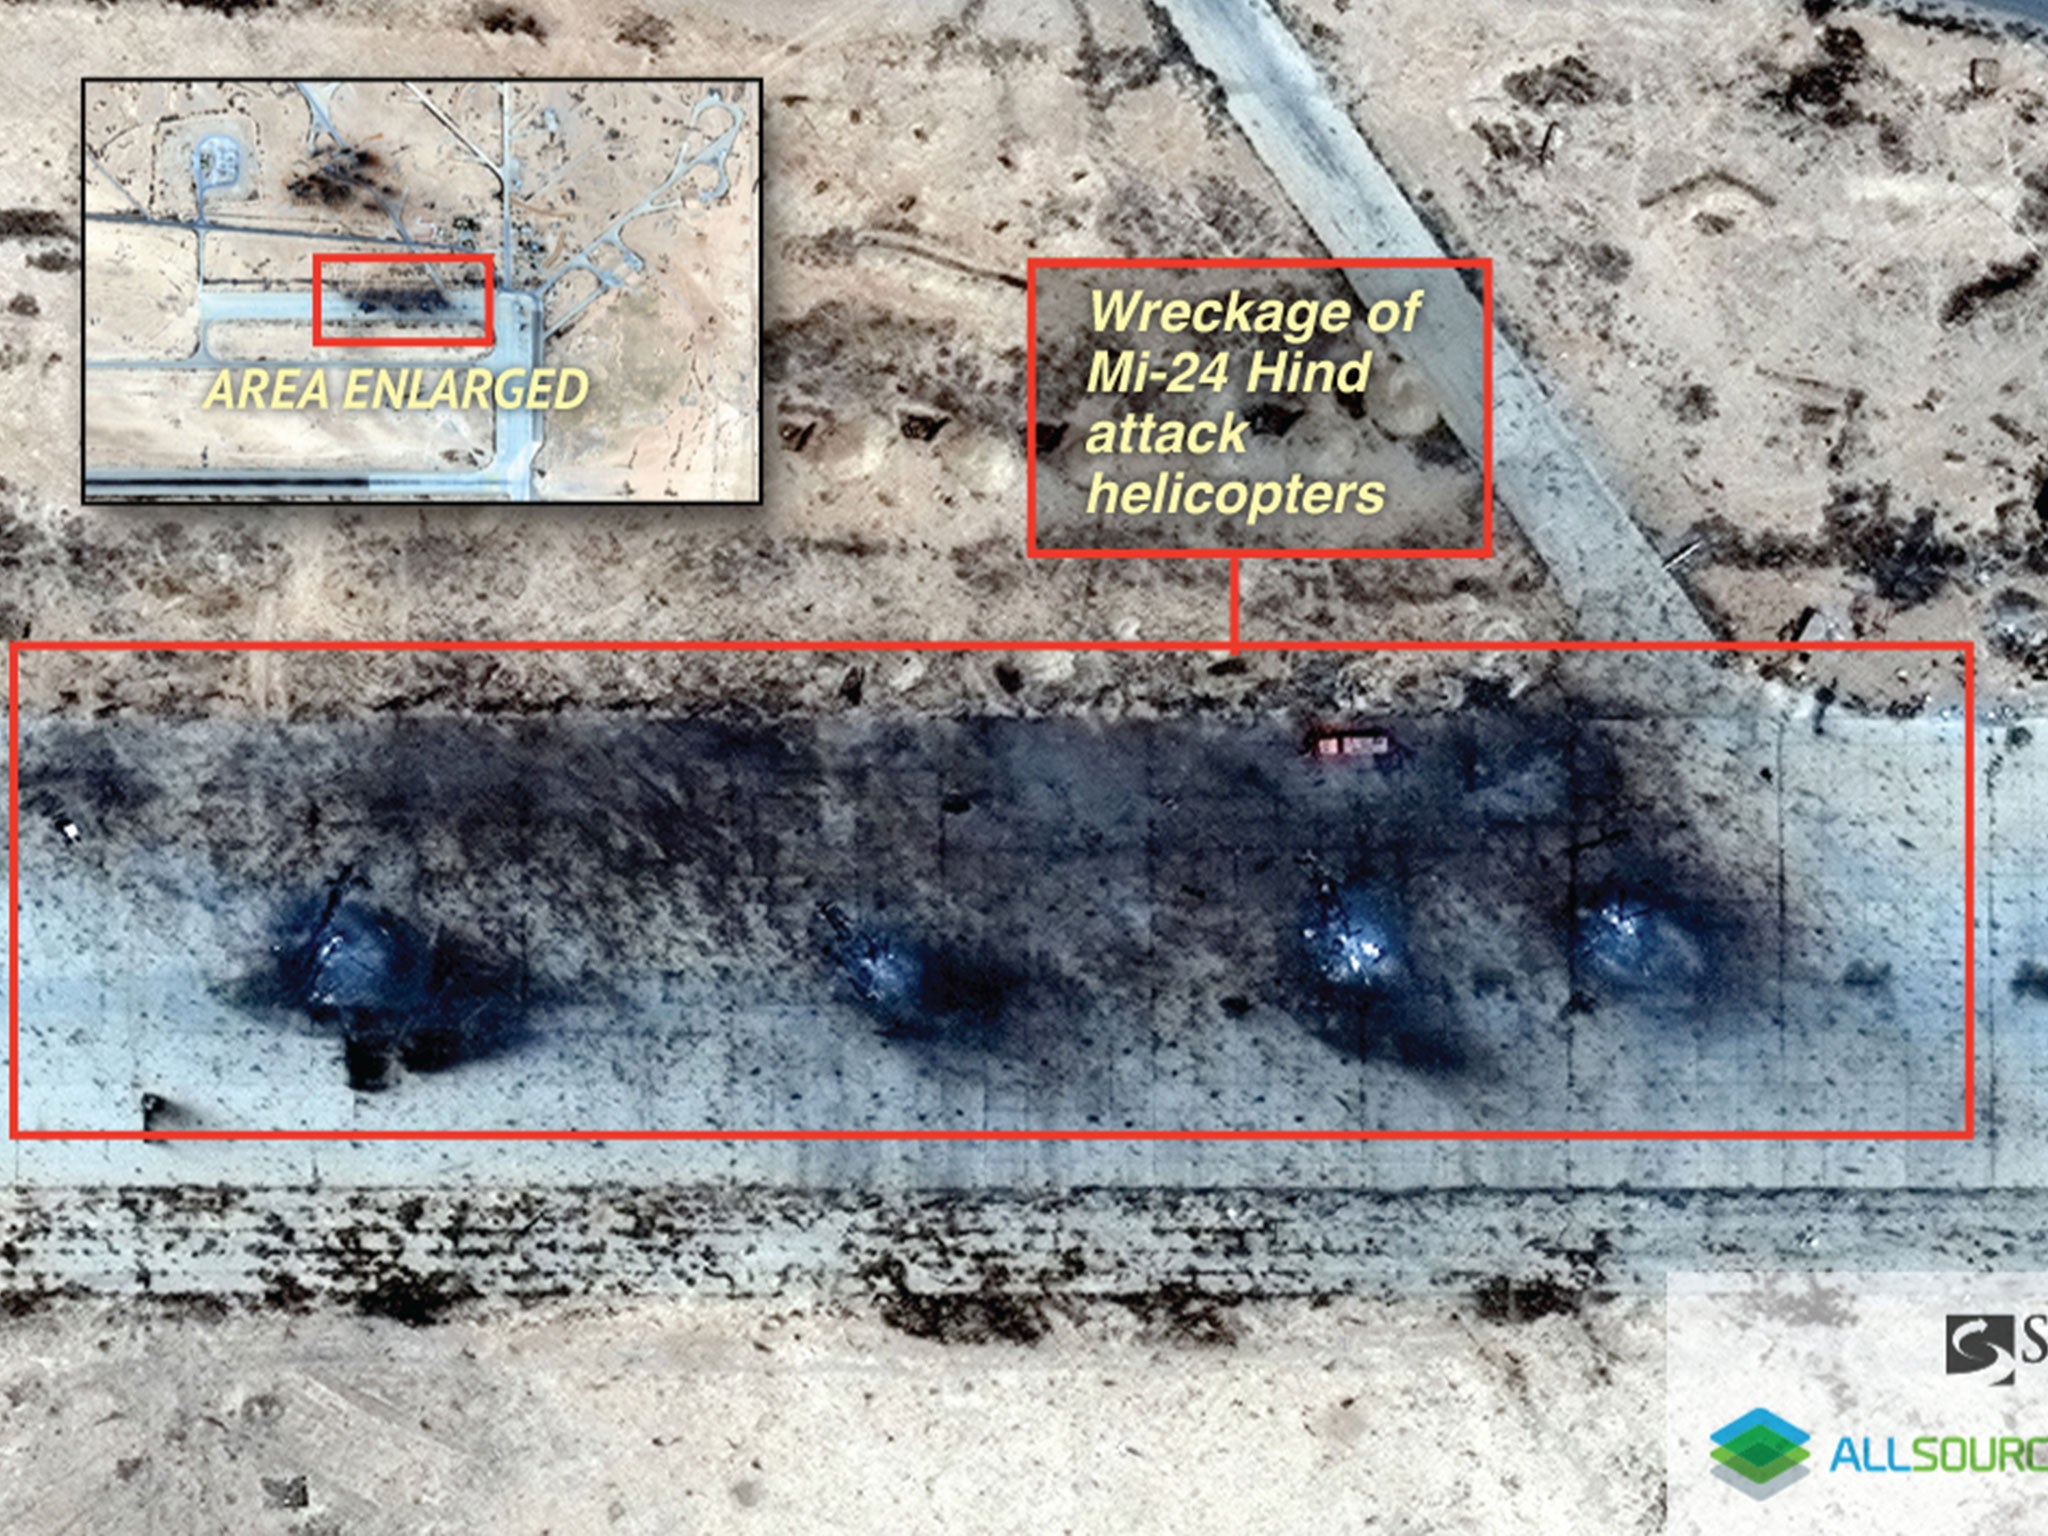 Satellite images taken on 17 May and acquired by Stratfor show the destroyed wreckage of four Russian Mi-24 Hind attack helicopters